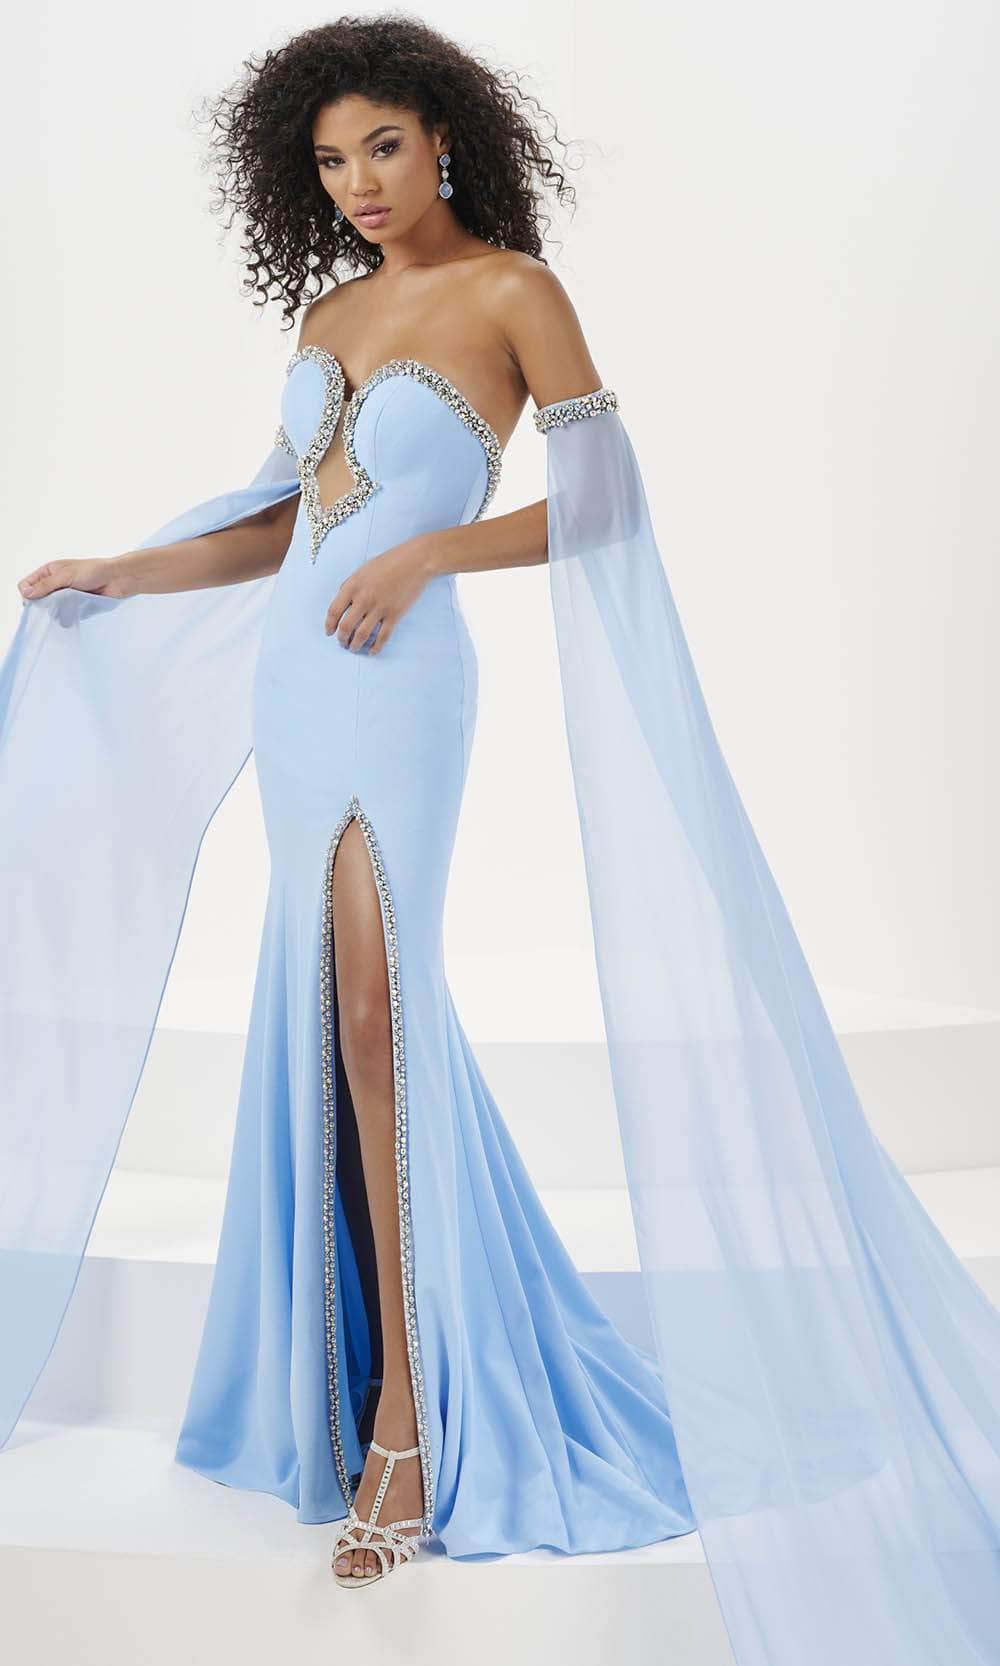 Panoply 14194 - Crystal Trim Sweetheart Evening Gown Evening Gown 0 / Sky